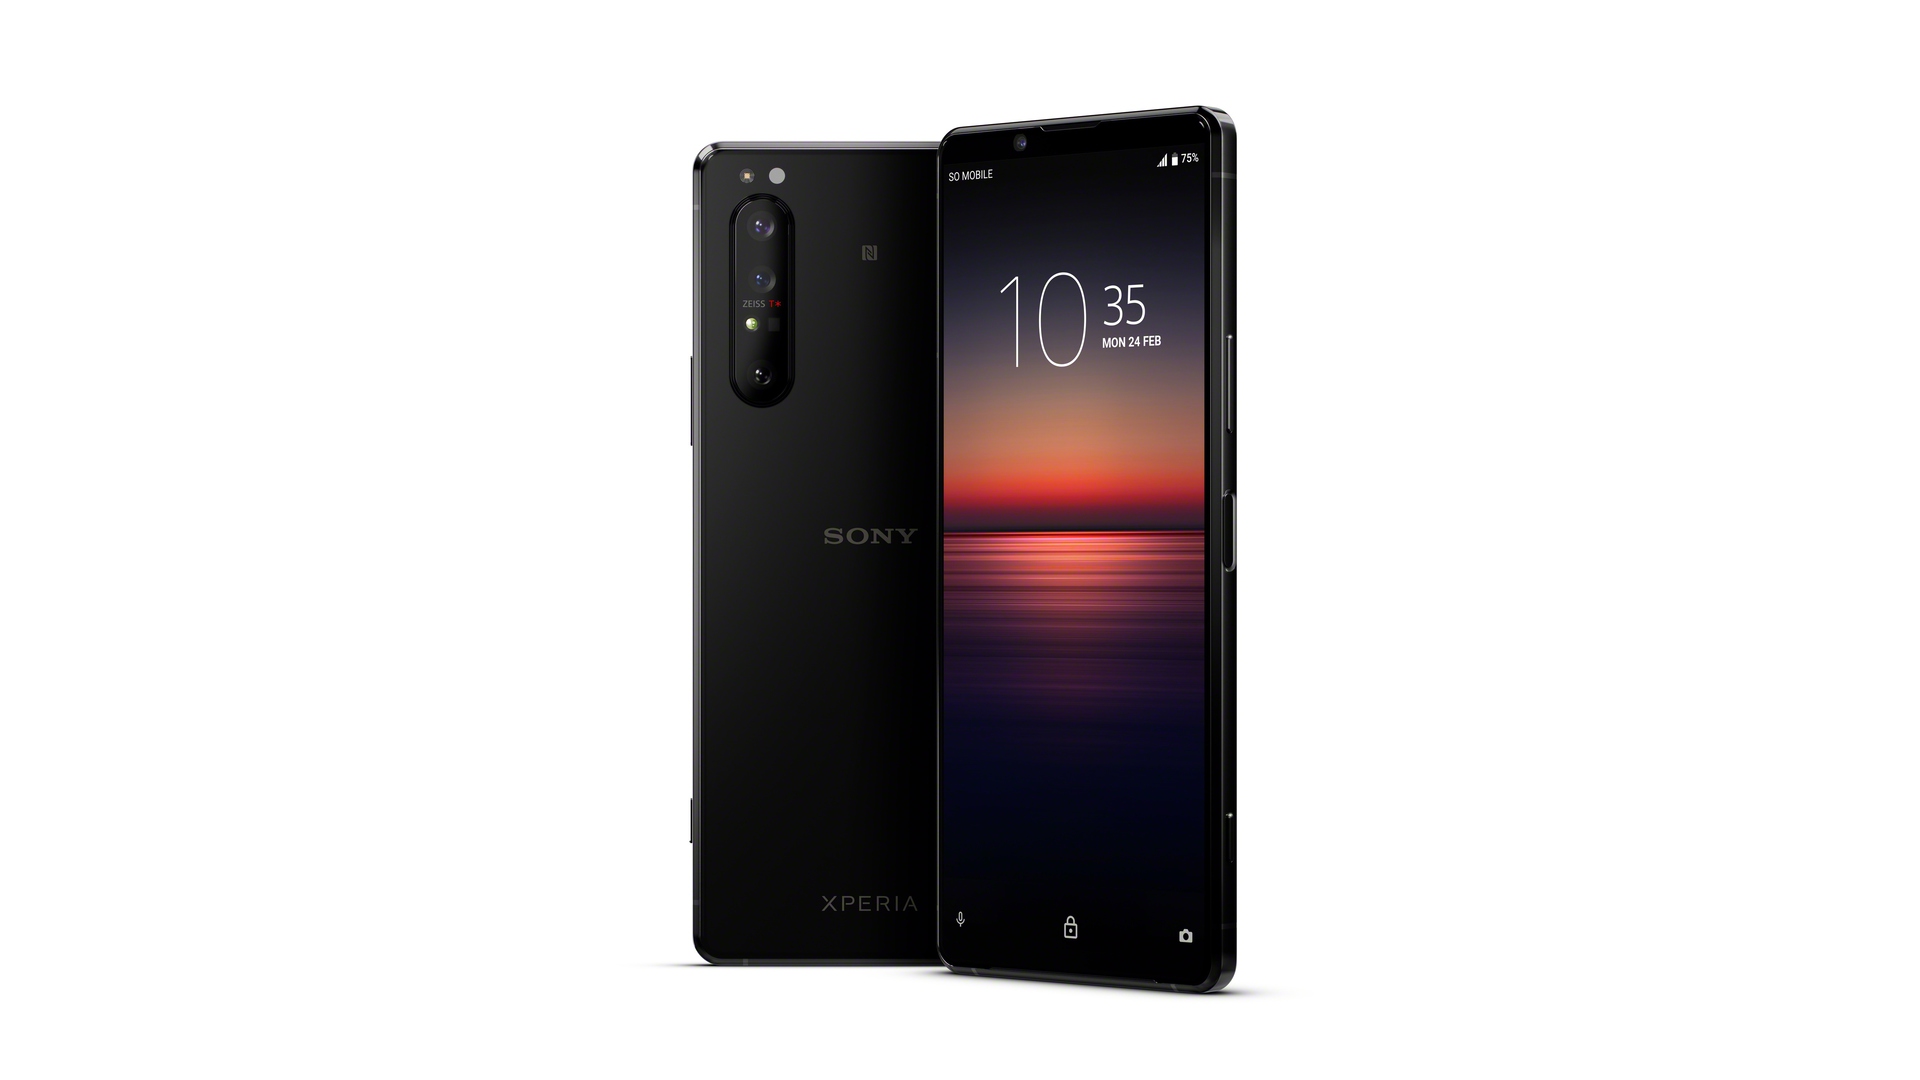 Sony Xperia 1 II specs: Find the full list here - Android Authority